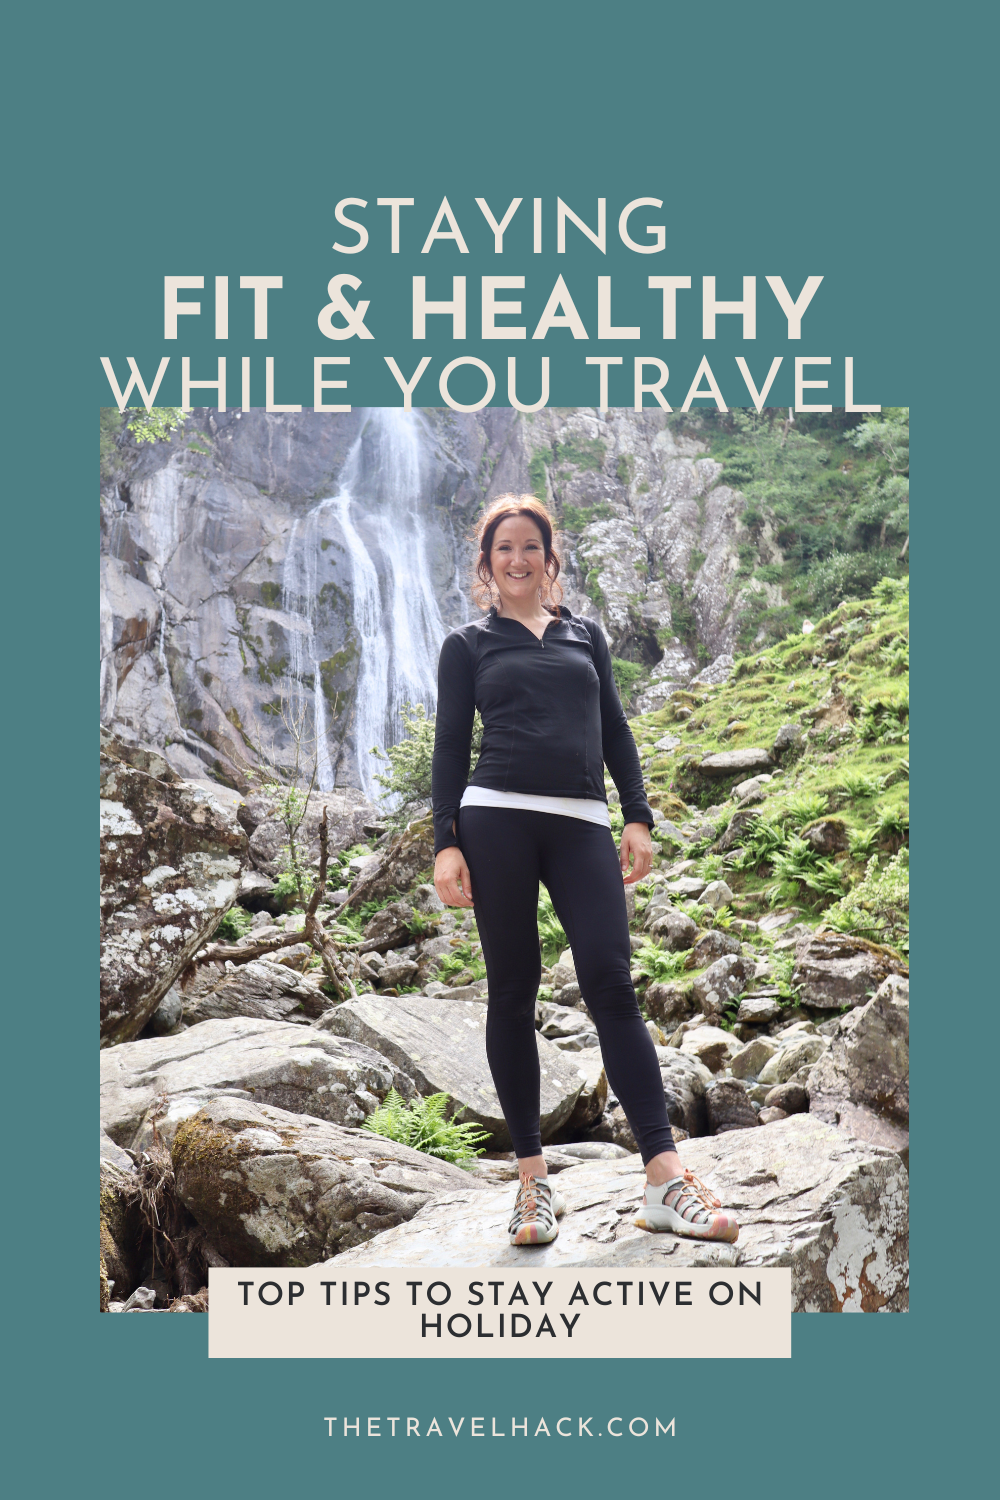 Staying fit and healthy when you travel